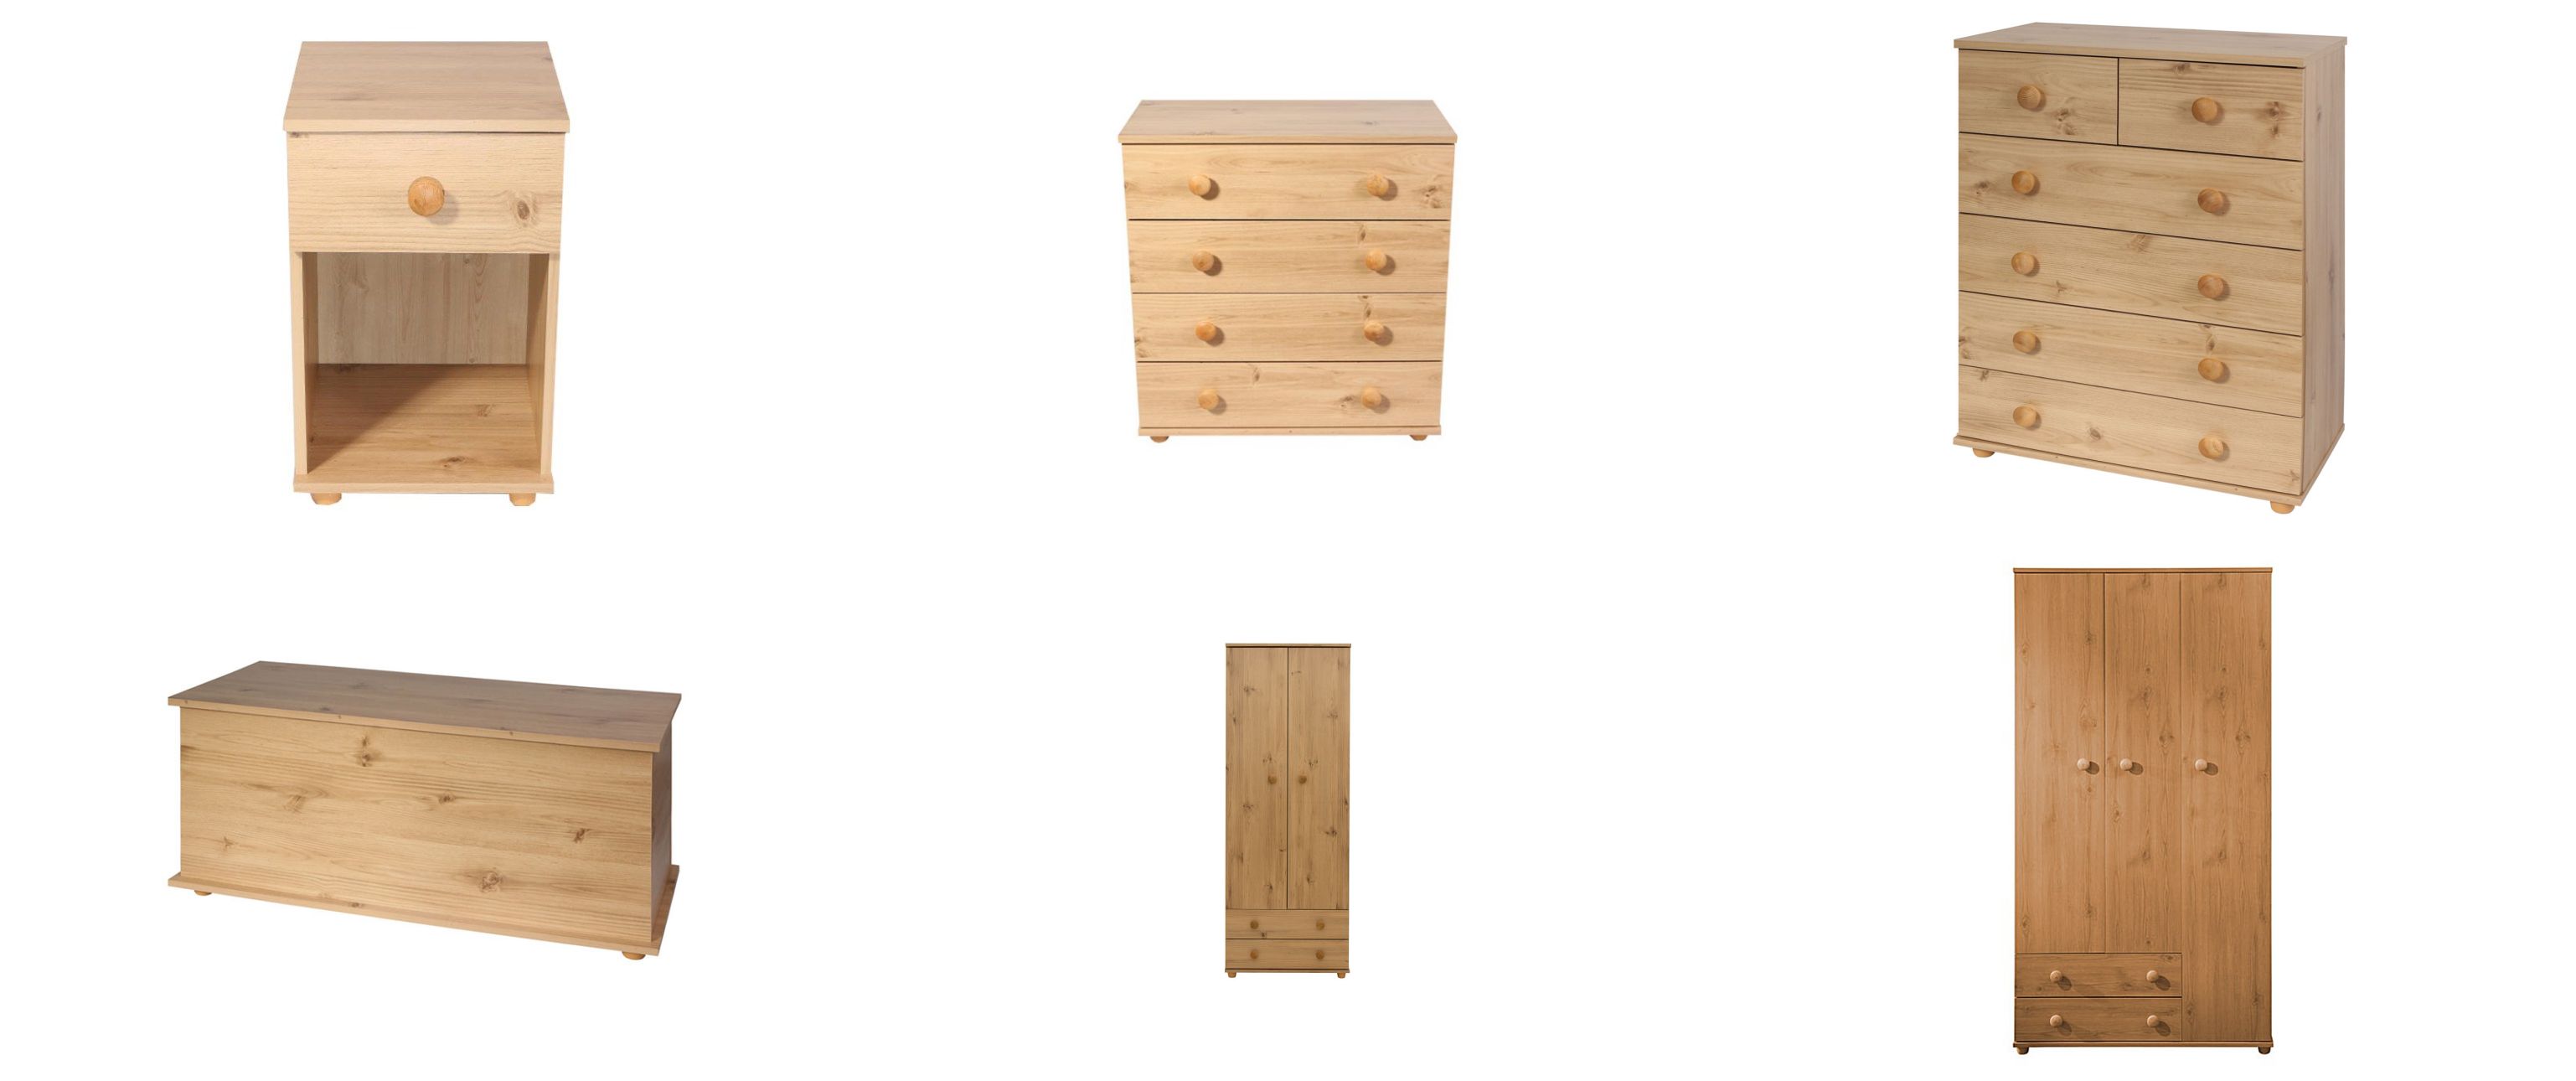 Details About Cambridge Pine Effect Bedroom Furniture Chest Of Drawers Wardrobes Bedside Table